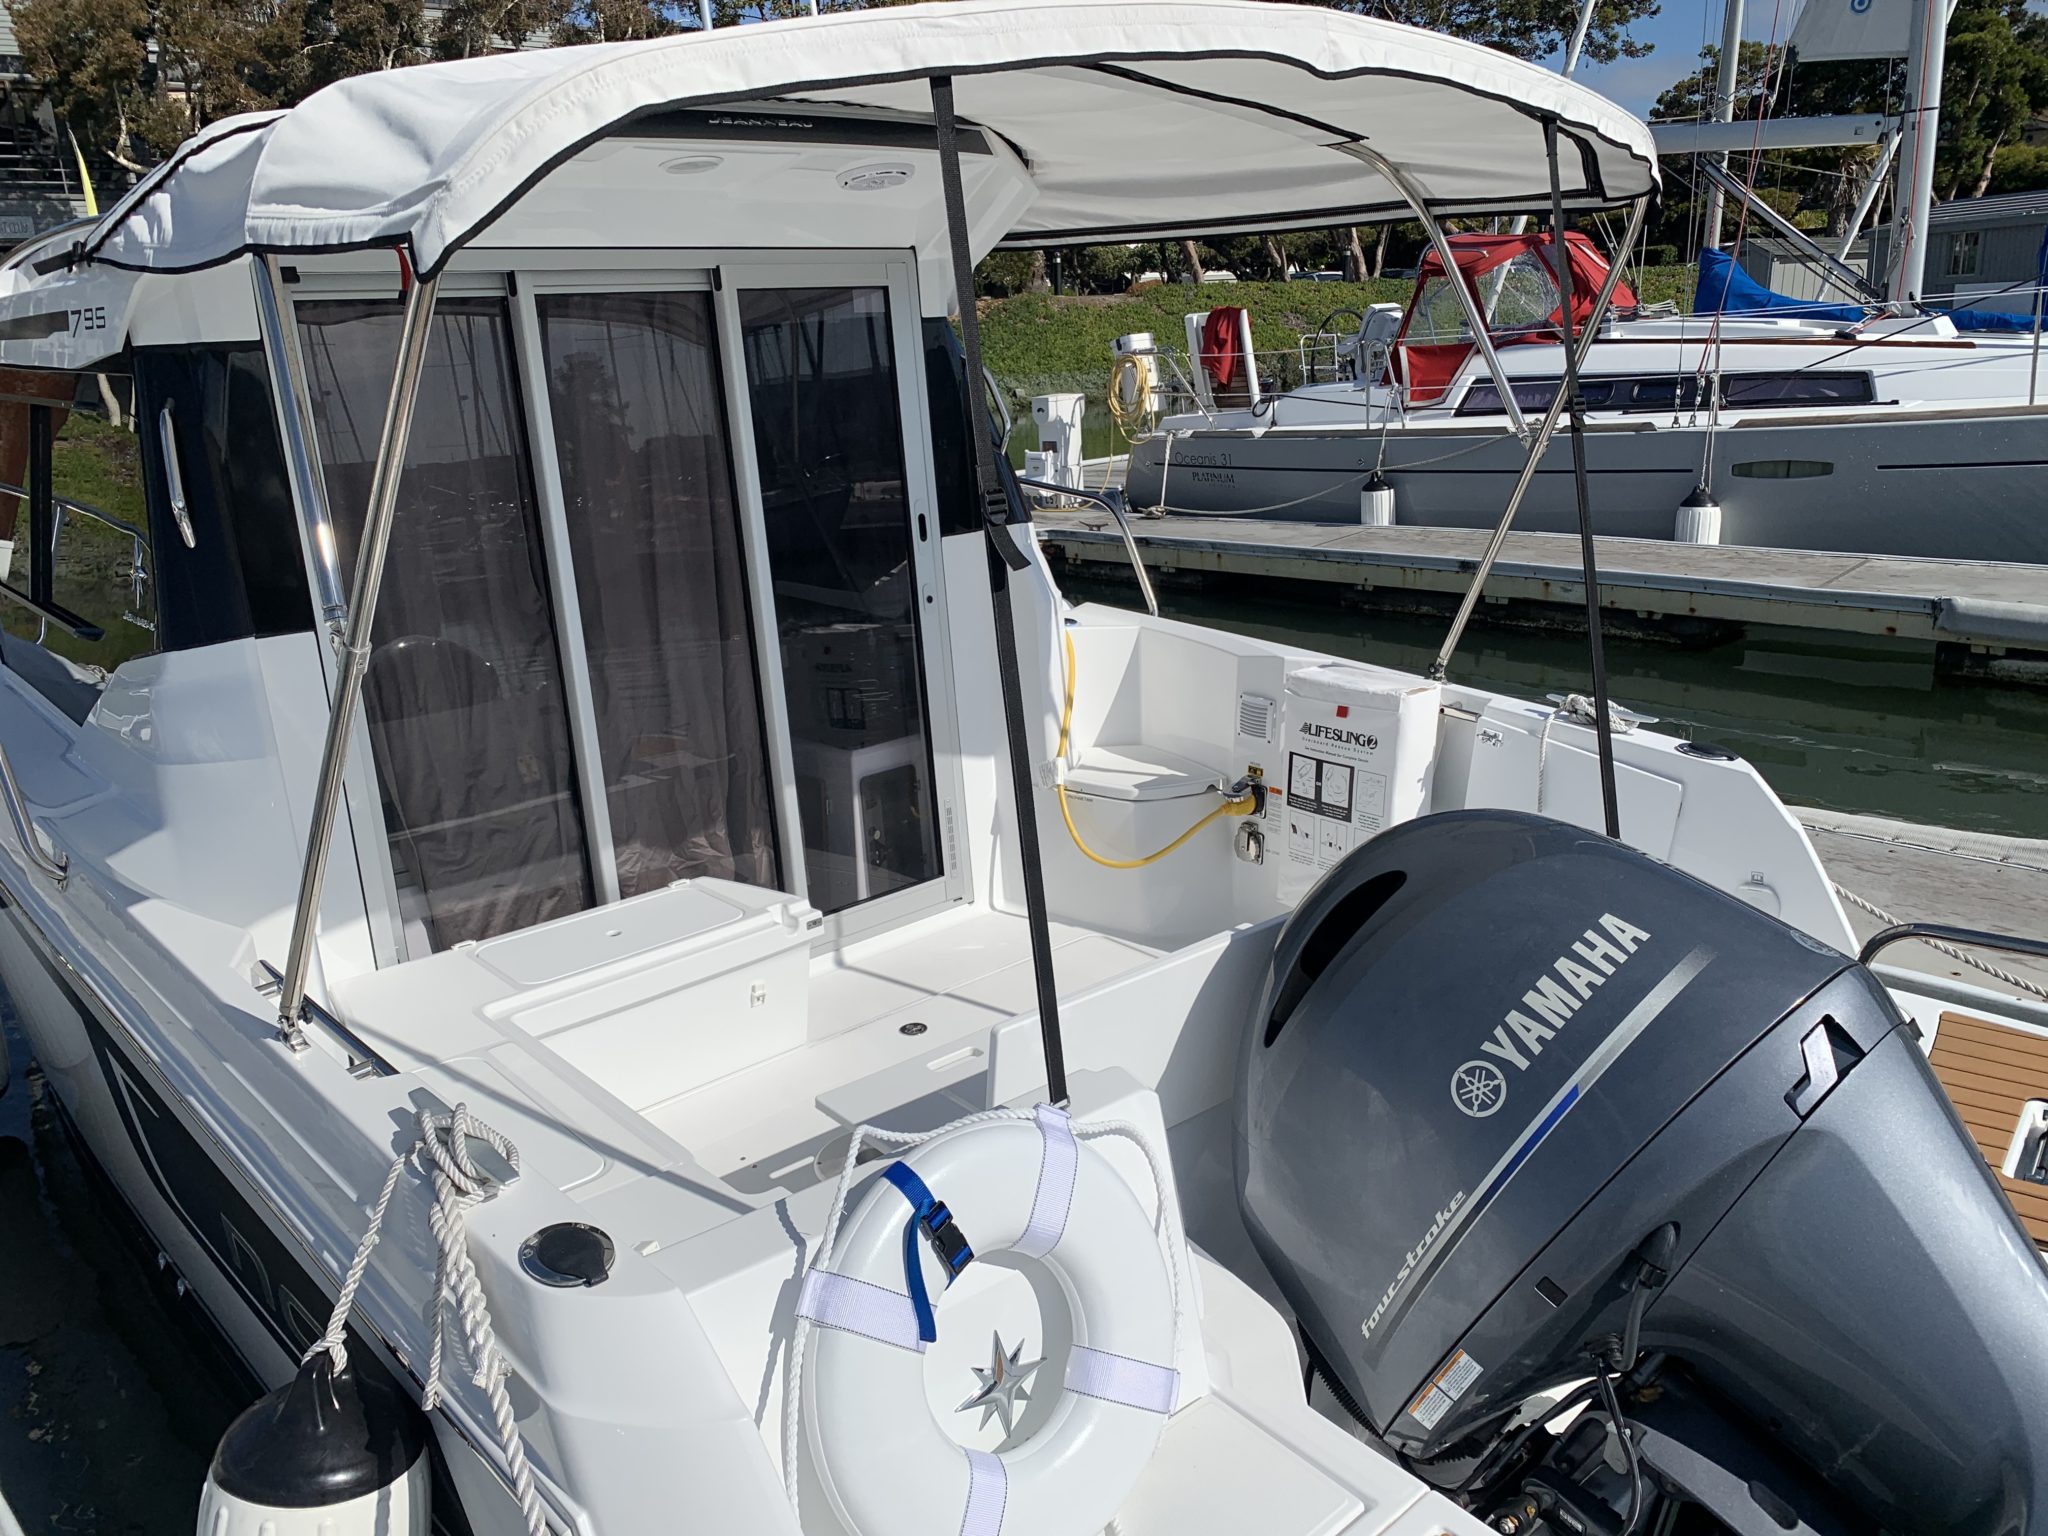 Exterior of a small powerboat